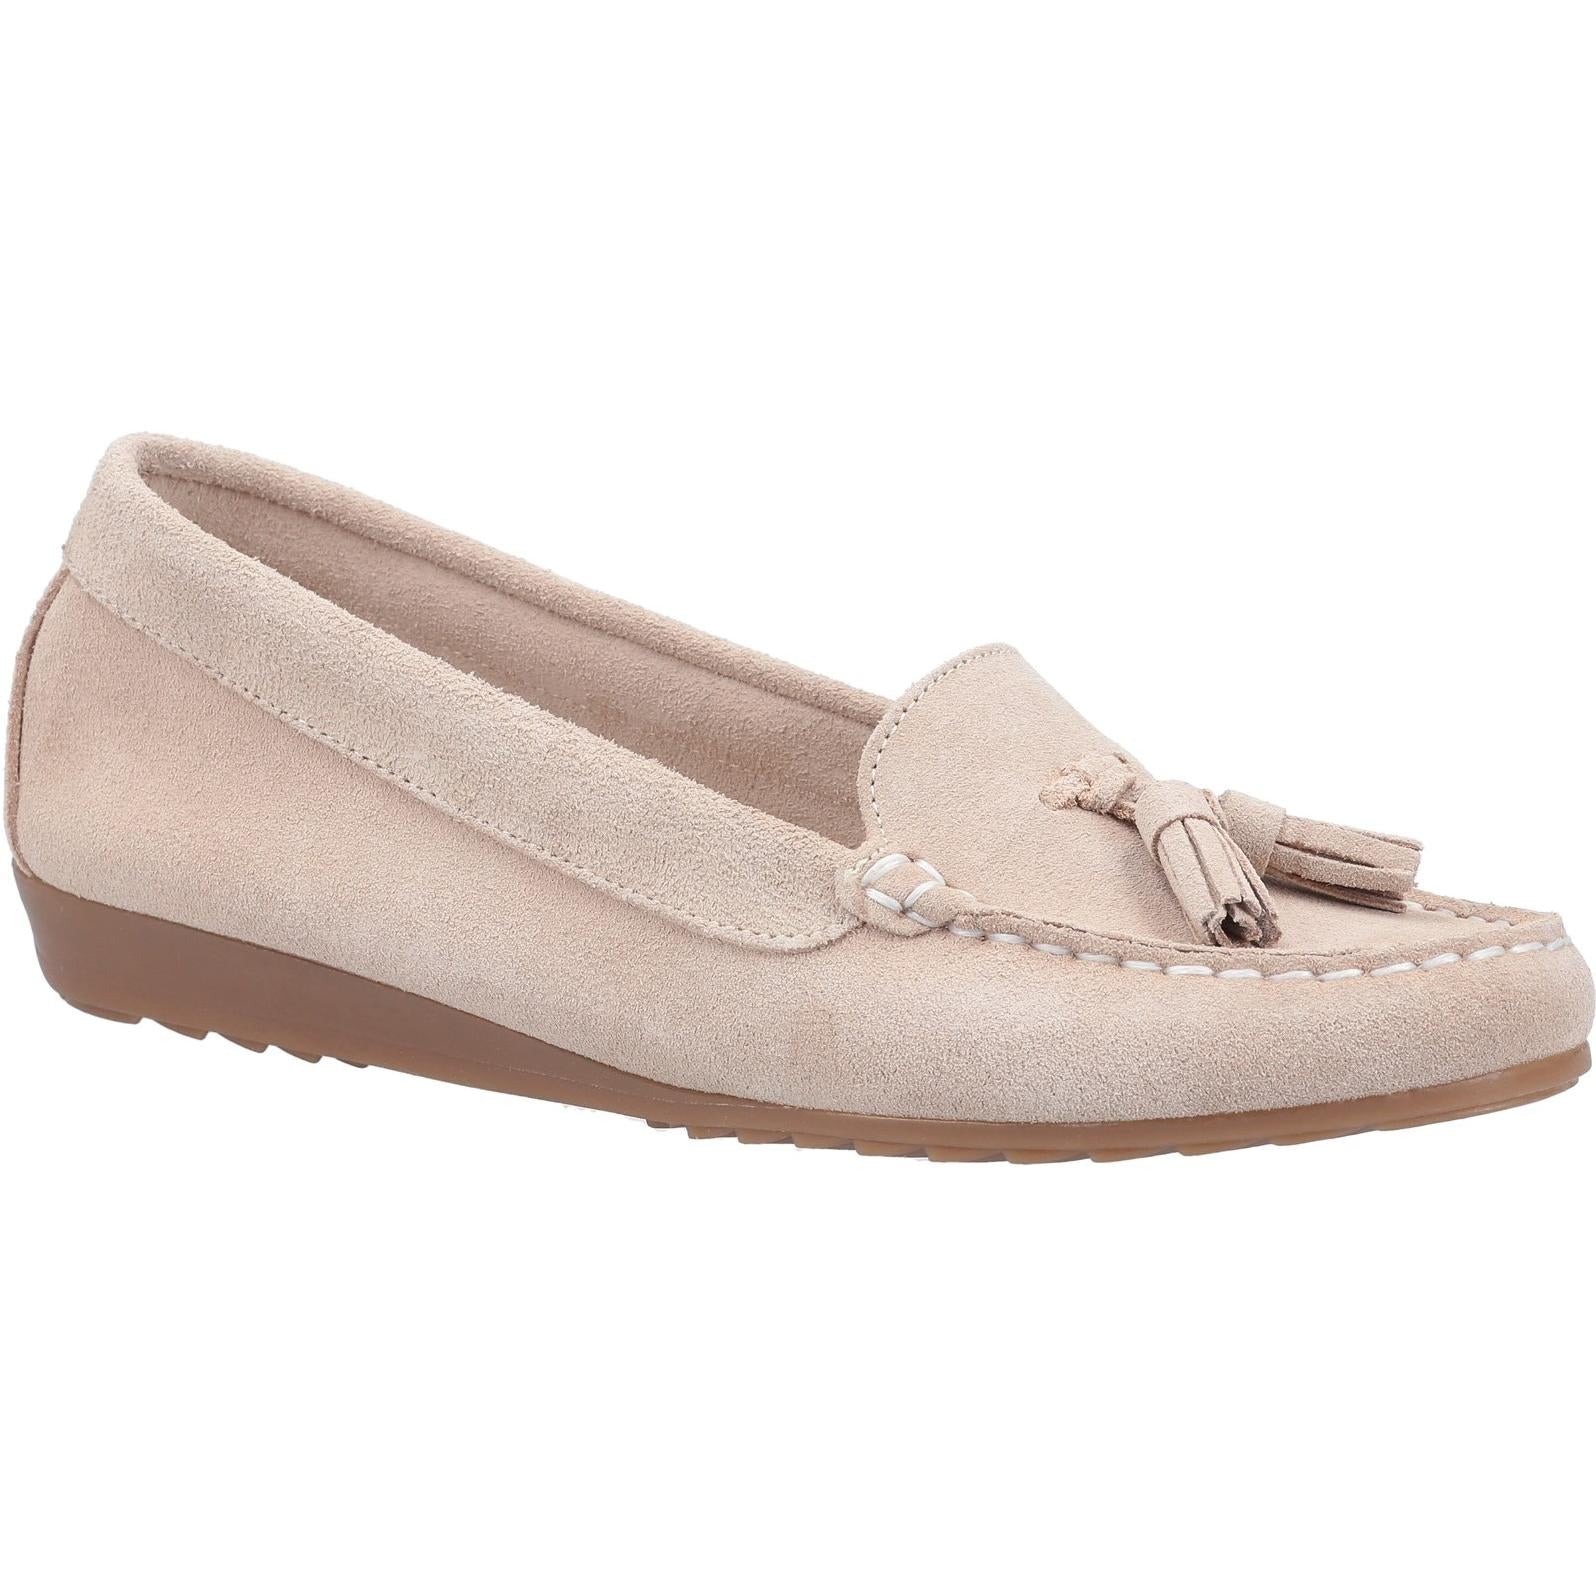 Riva Aldons Moccasin with Tassels Flats